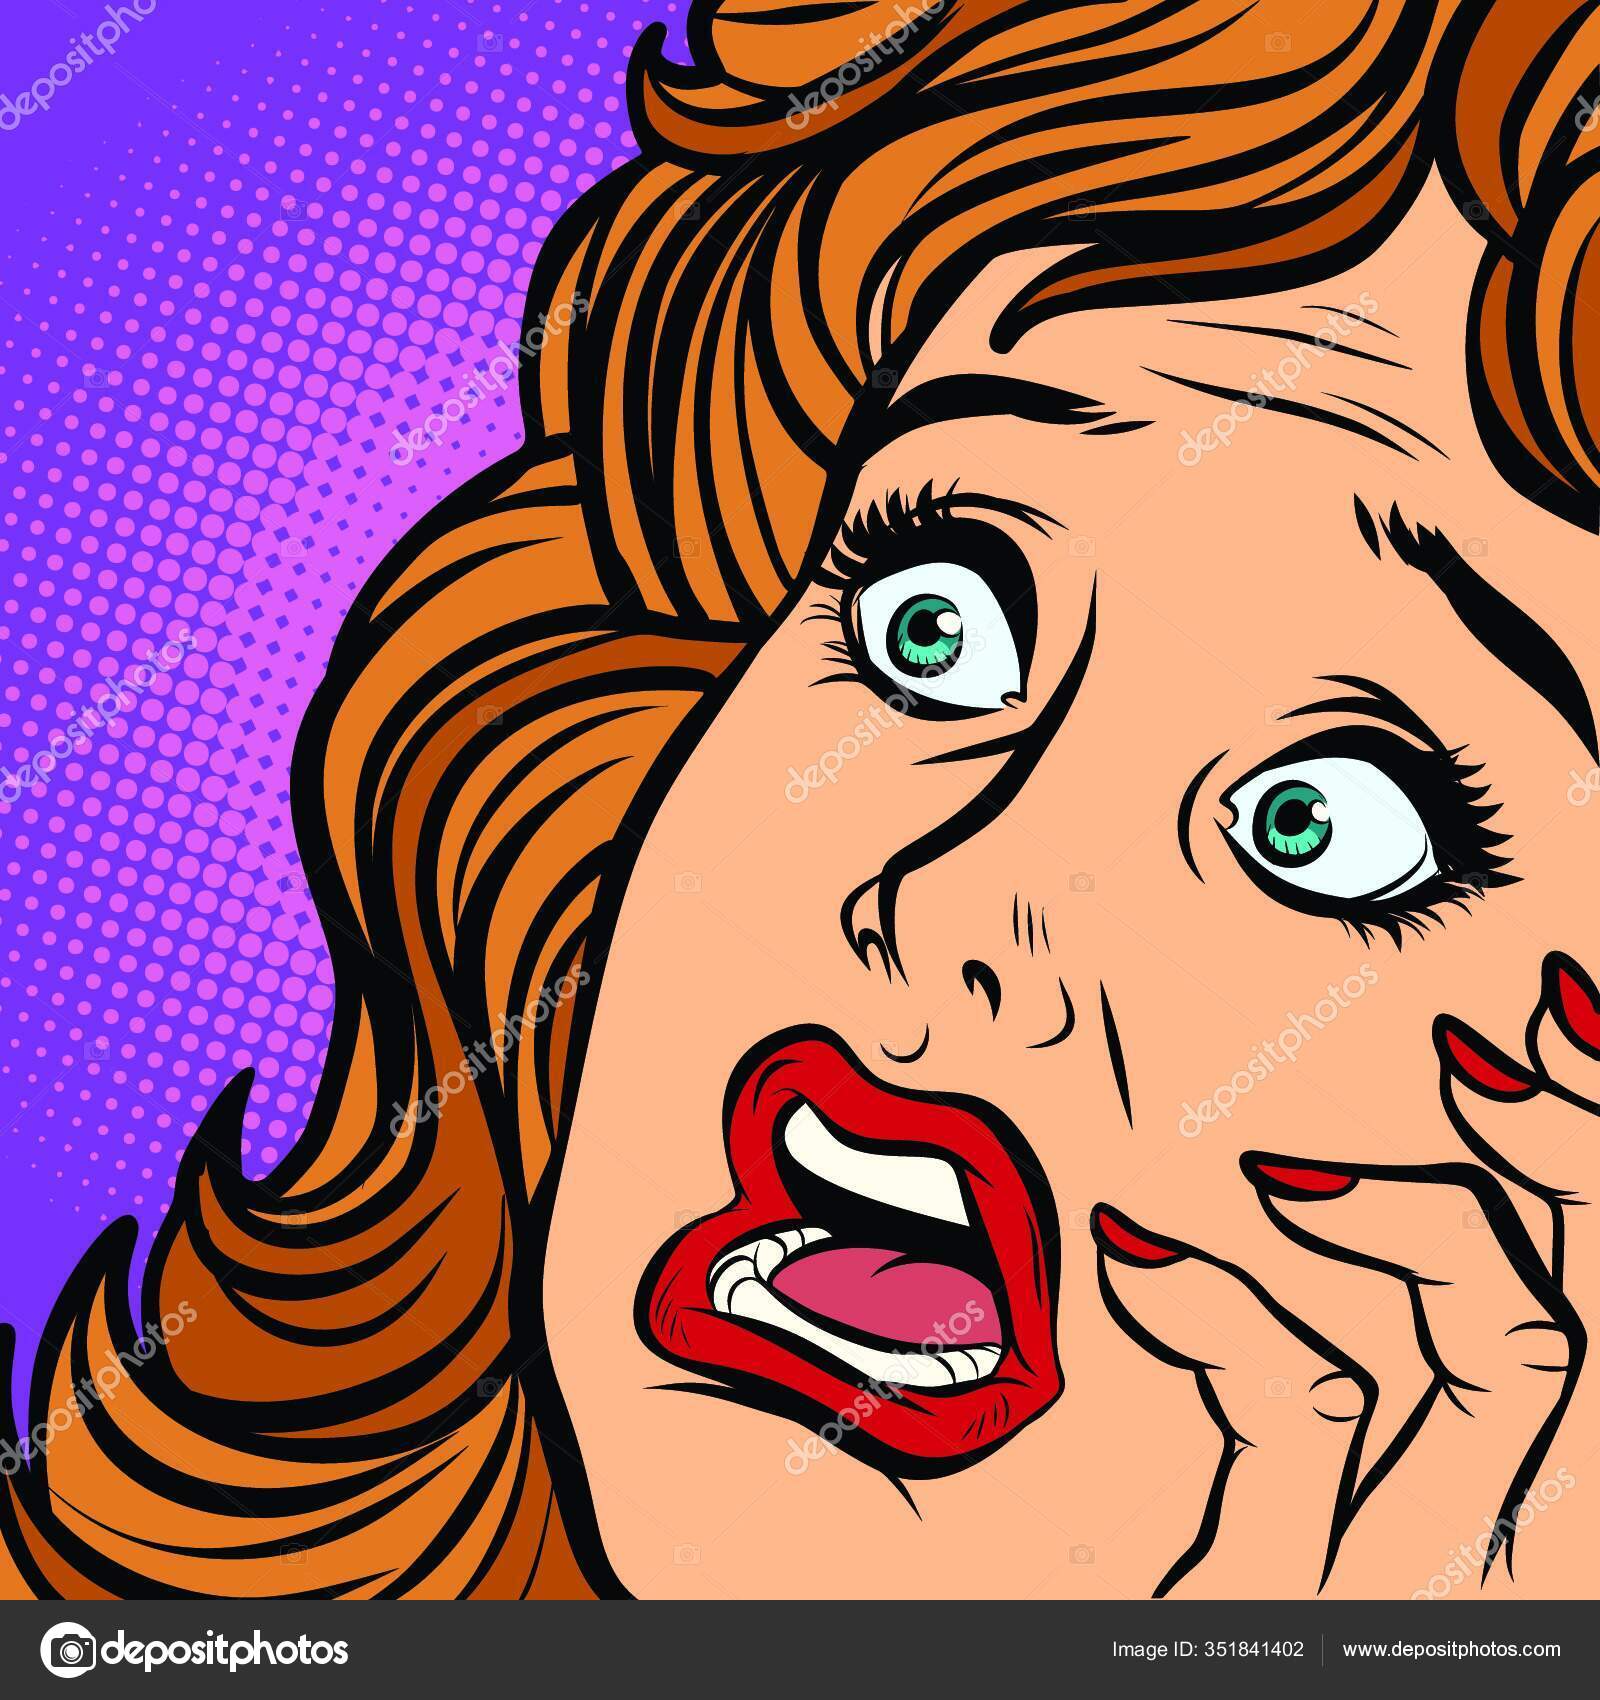 Fear Cartoon Emotion. Scared Face Comic Graphic by microvectorone